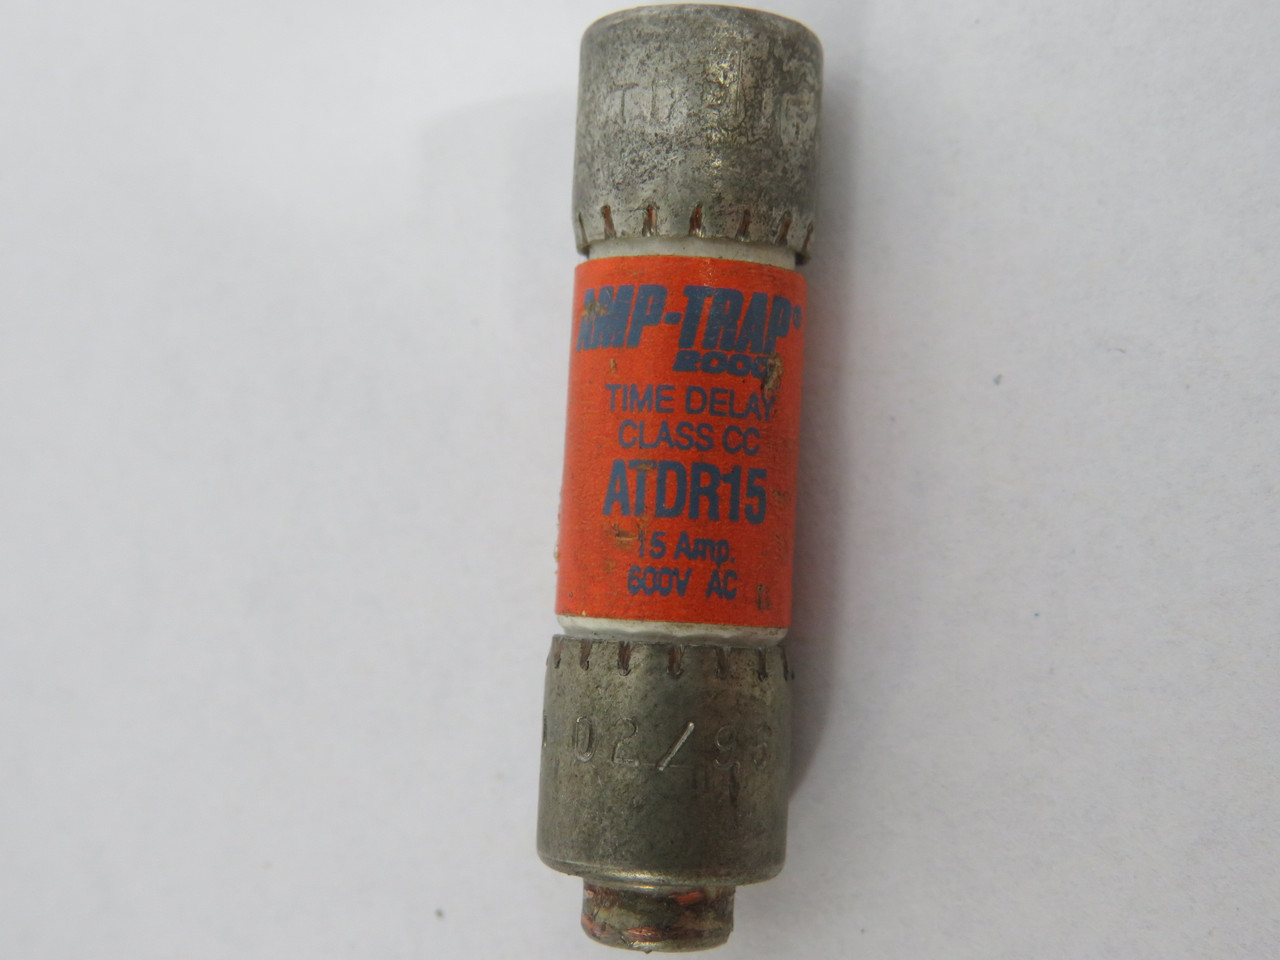 Gould Shawmut ATDR15 Time Delay Fuse 15A 600VAC USED